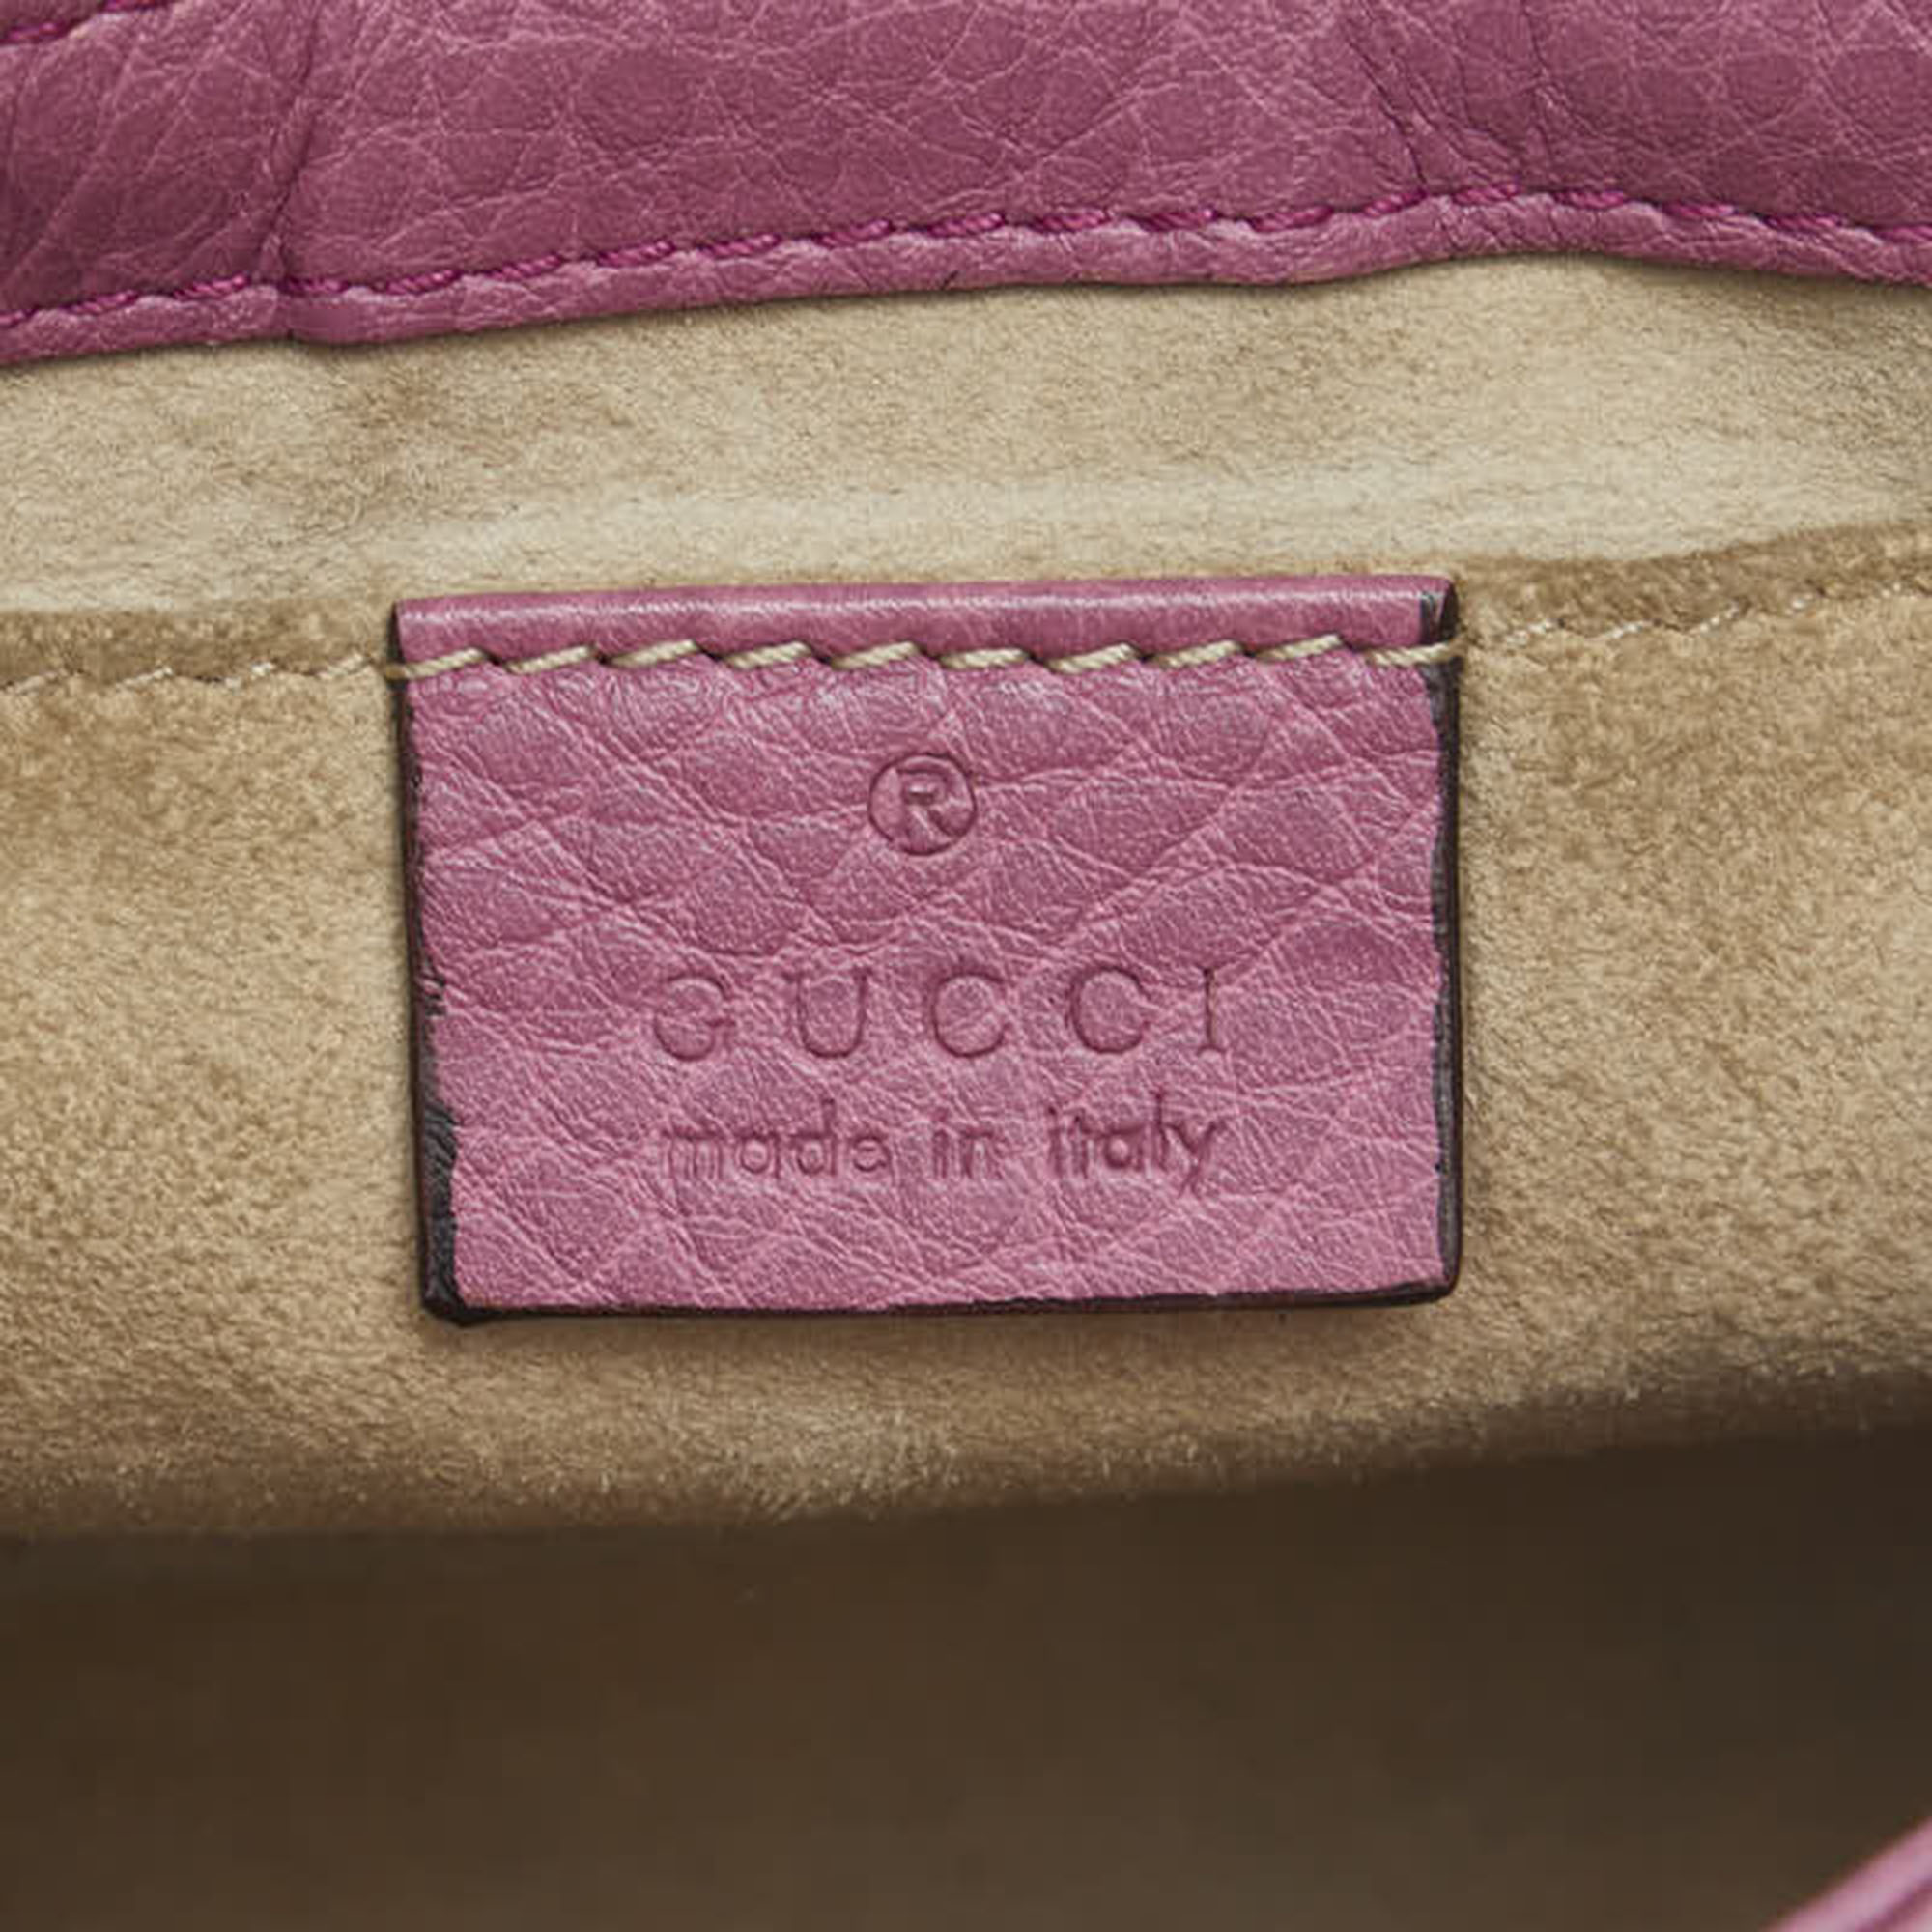 Gucci Pink Leather 1973 Chain Shoulder Bag